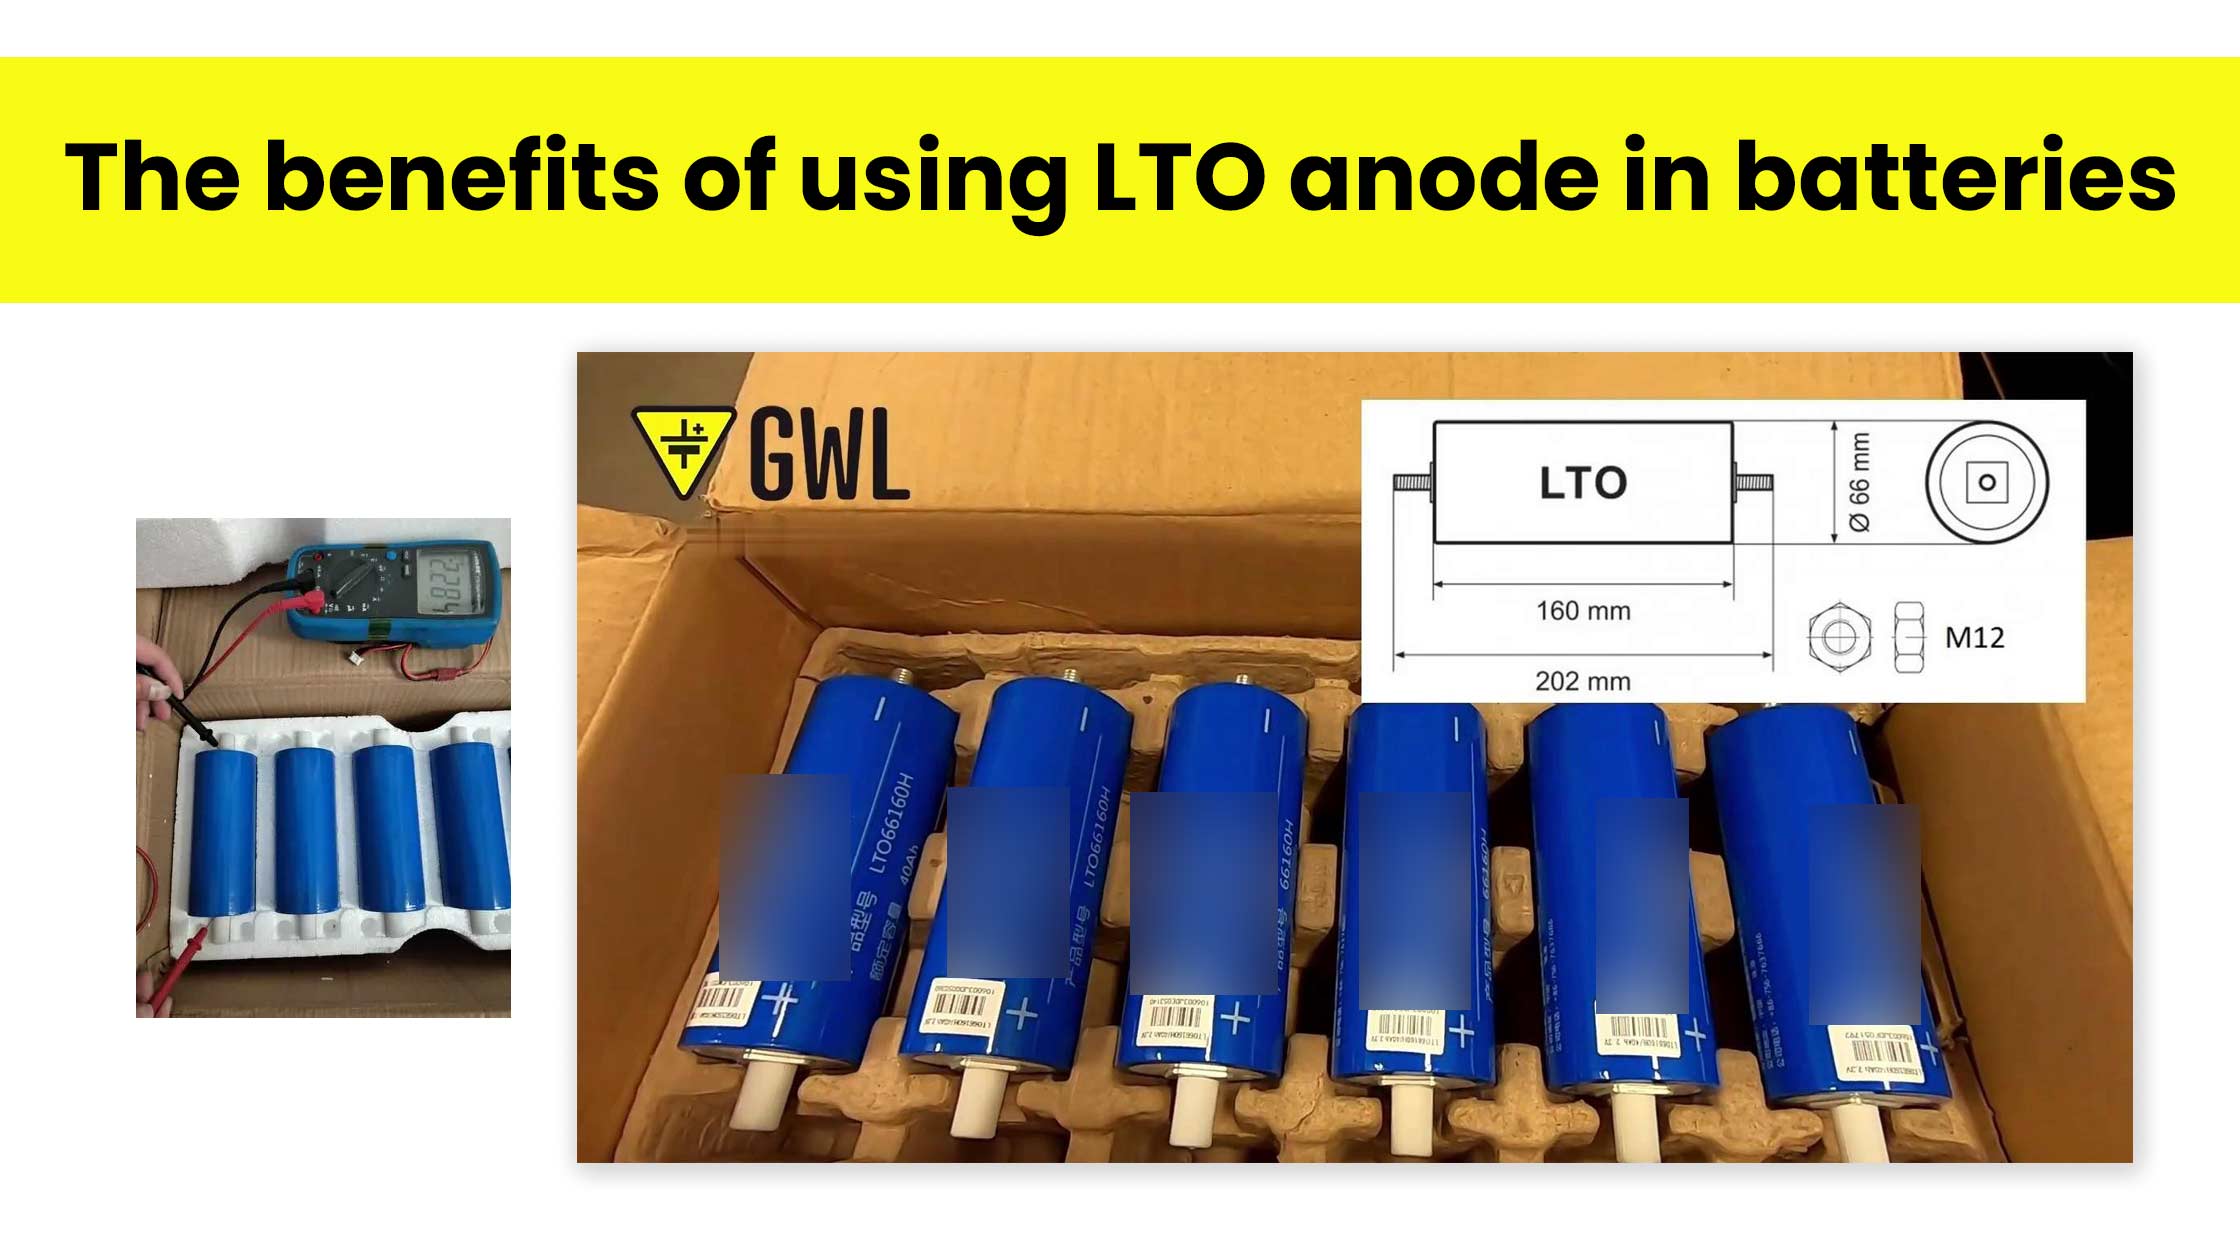 The benefits of using LTO anode in batteries. What Are The Advantages Of LTO Anode?